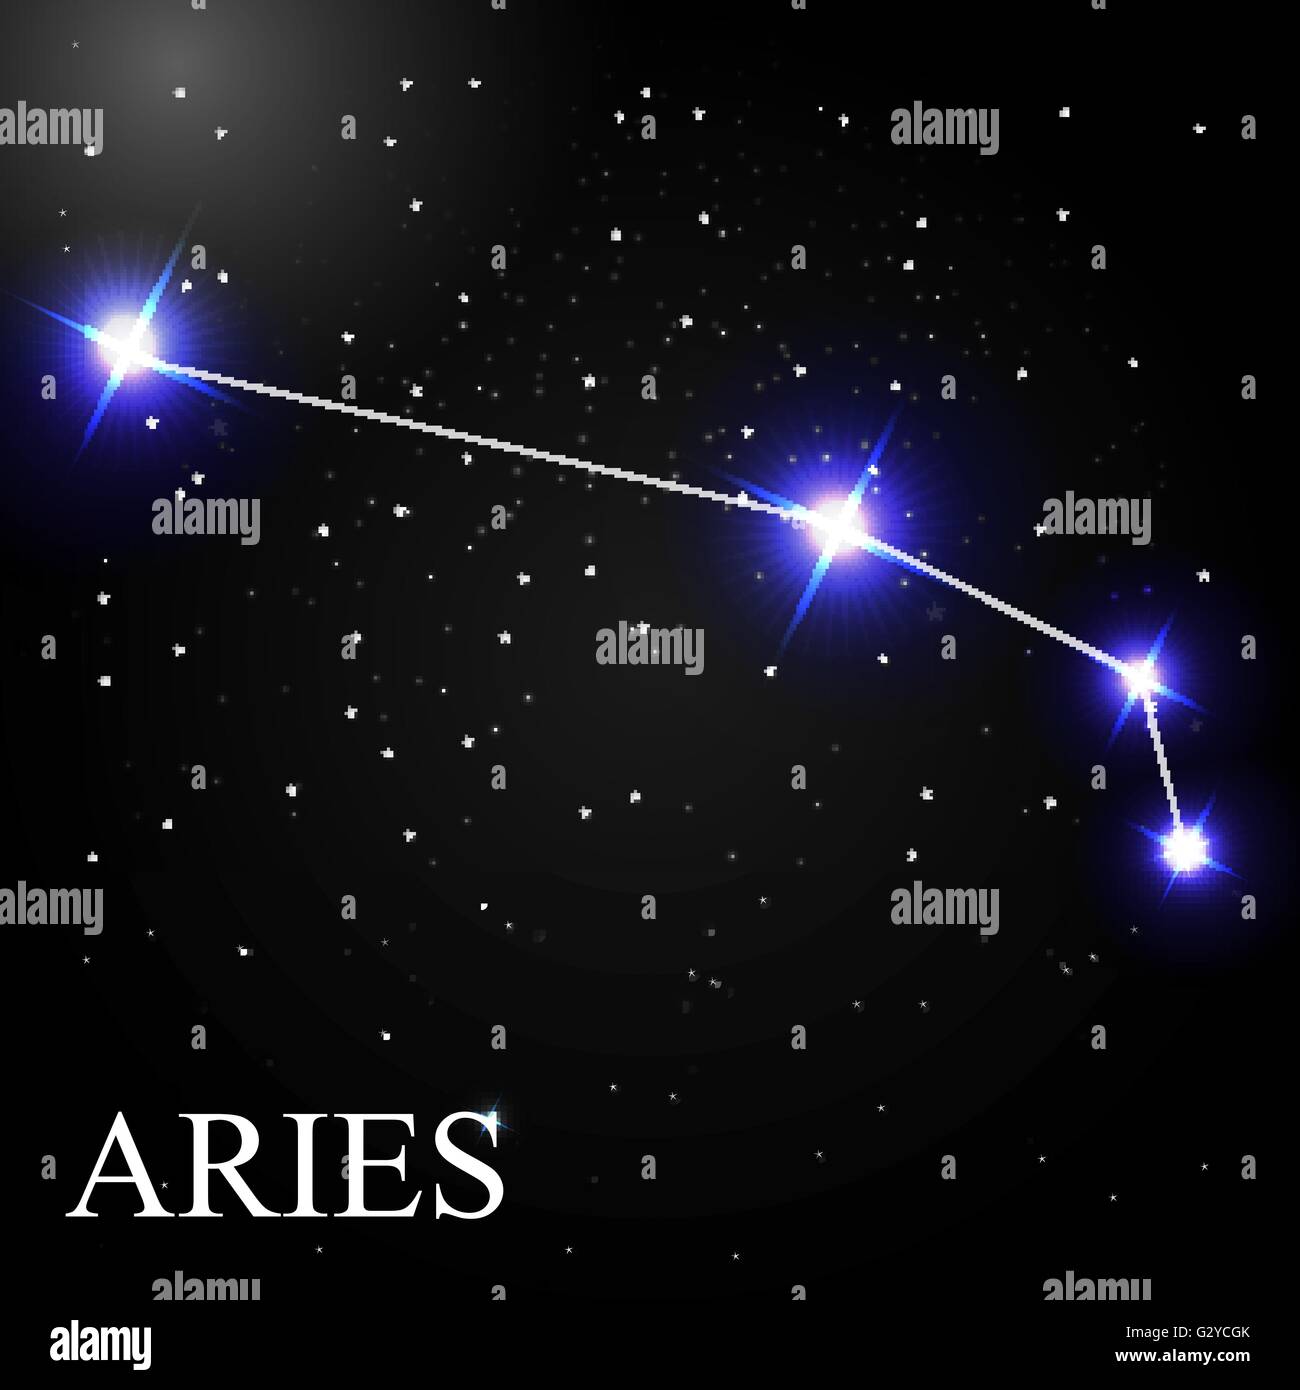 Aries Zodiac Sign with Beautiful Bright Stars on the Background Stock ...